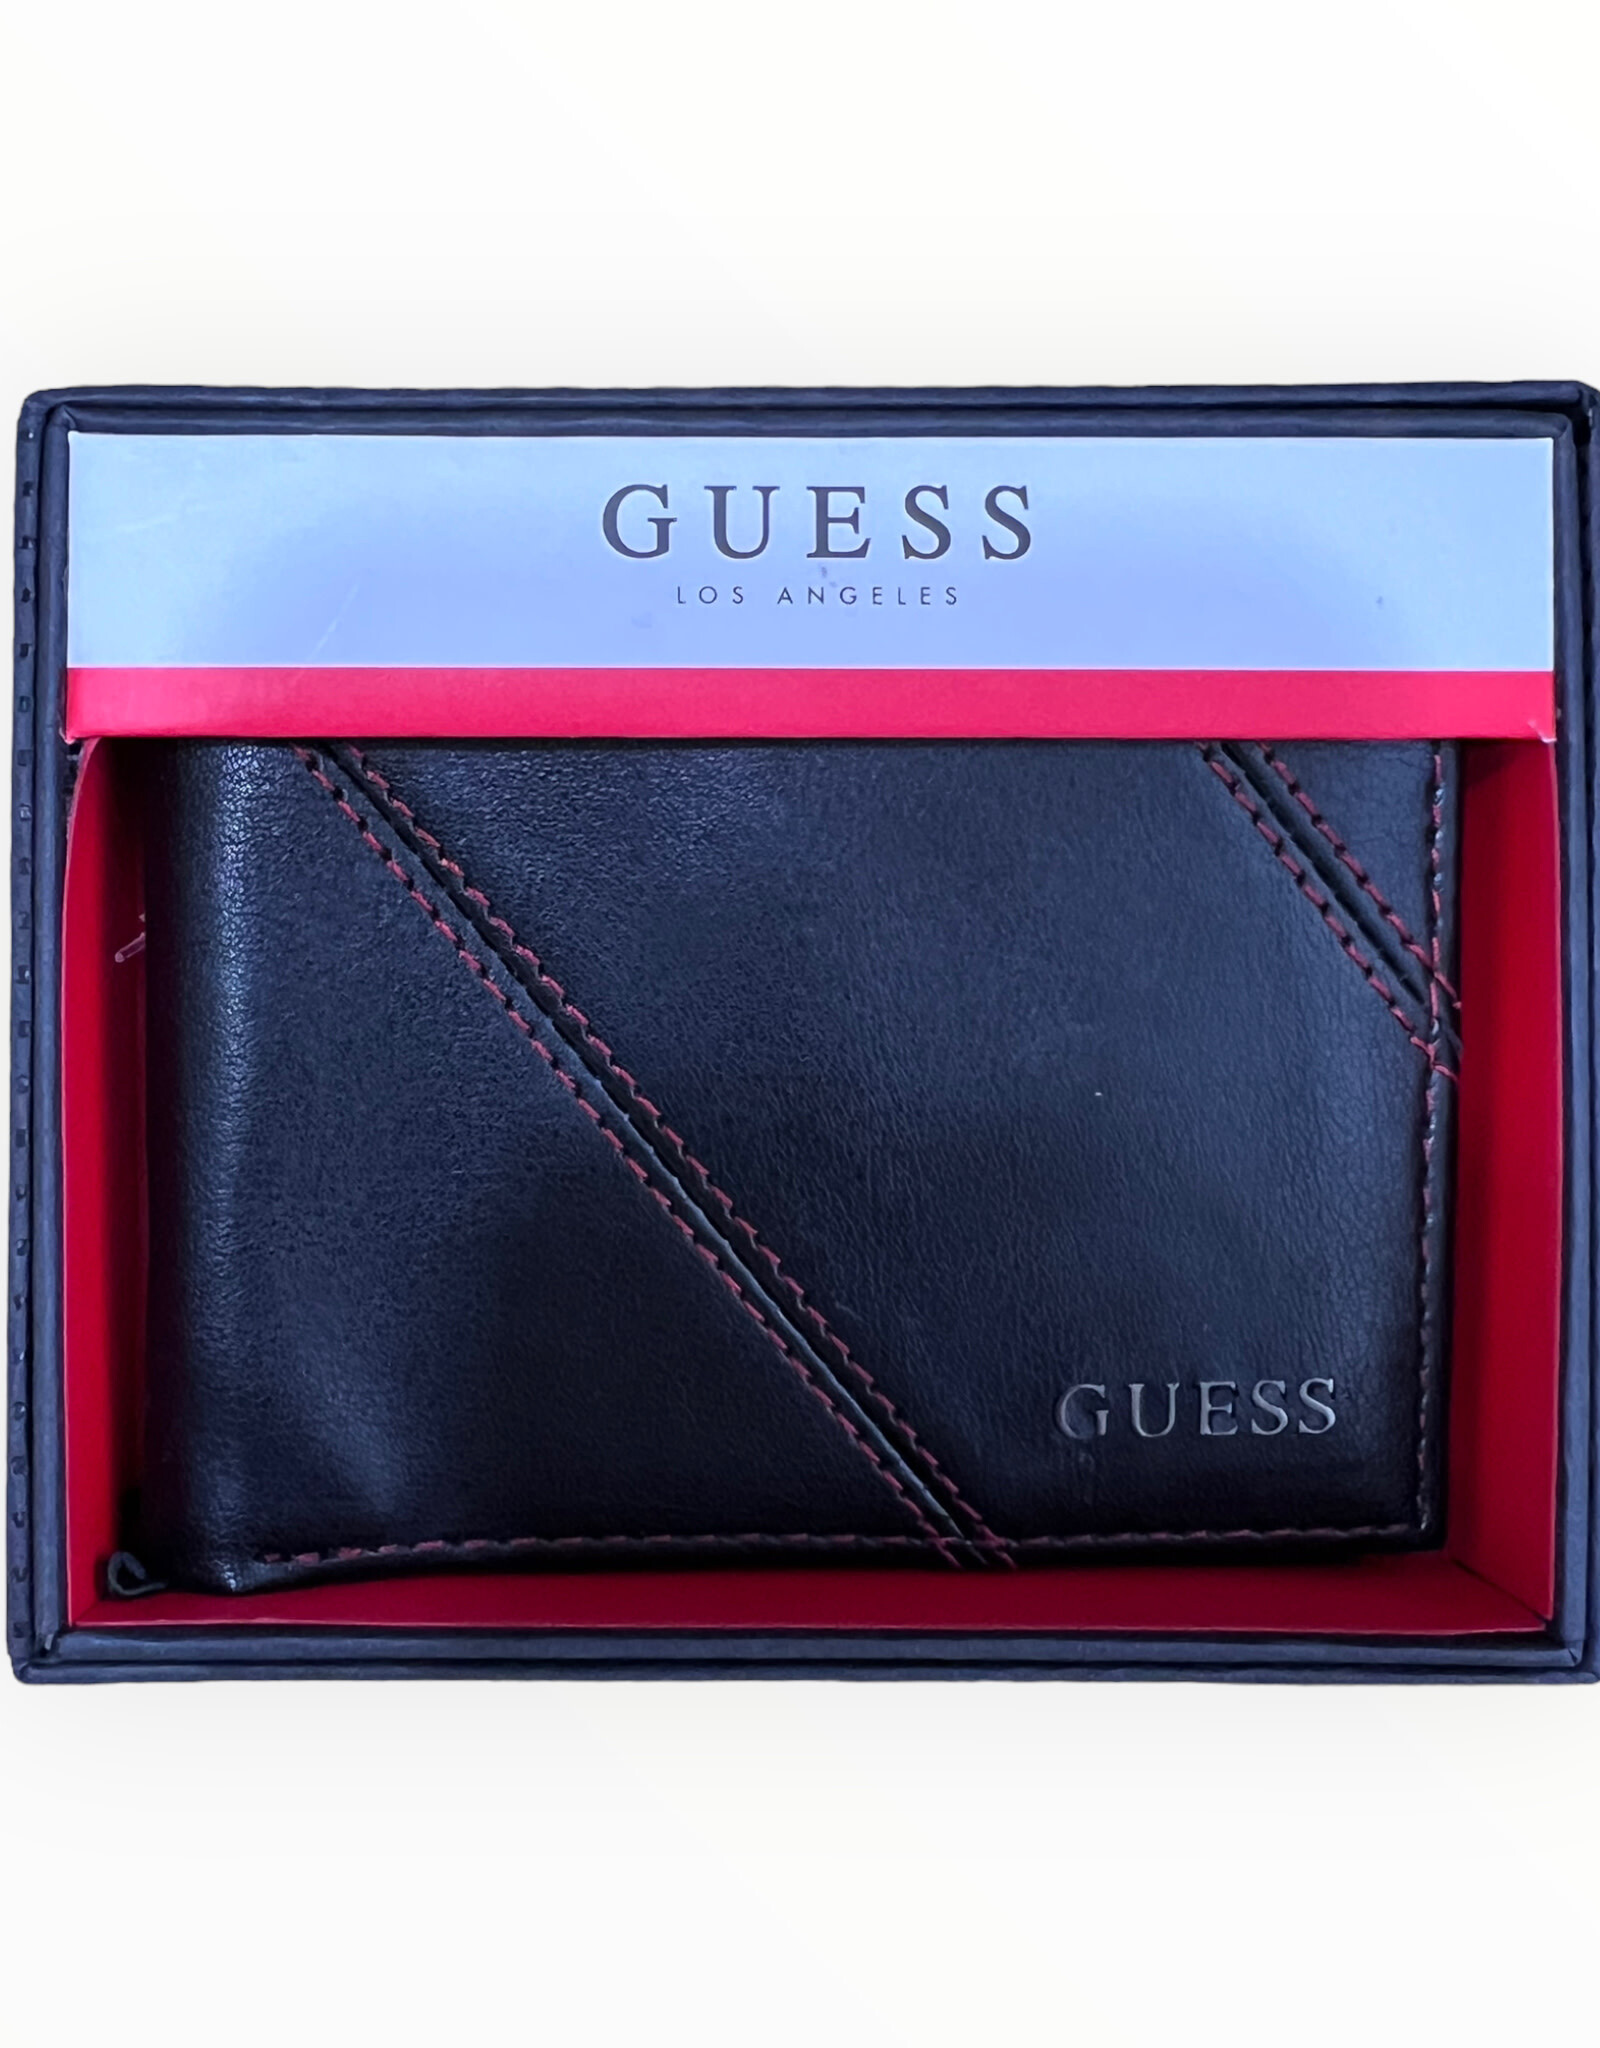 Guess Guess Billfold Leather